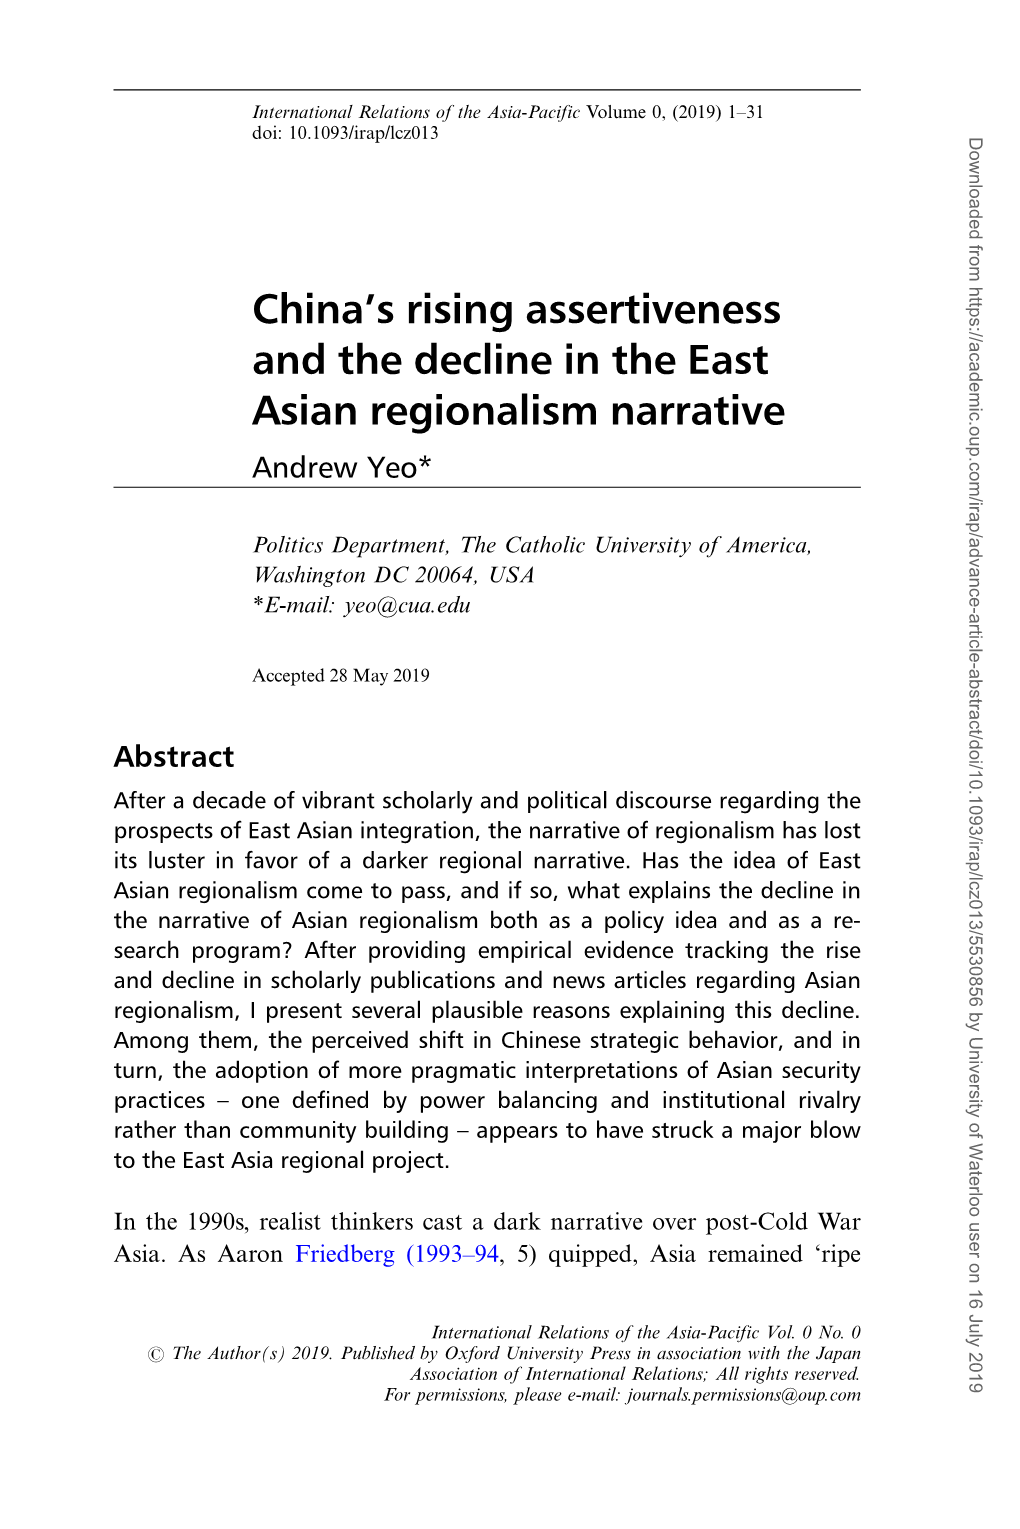 China's Rising Assertiveness and the Decline in the East Asian